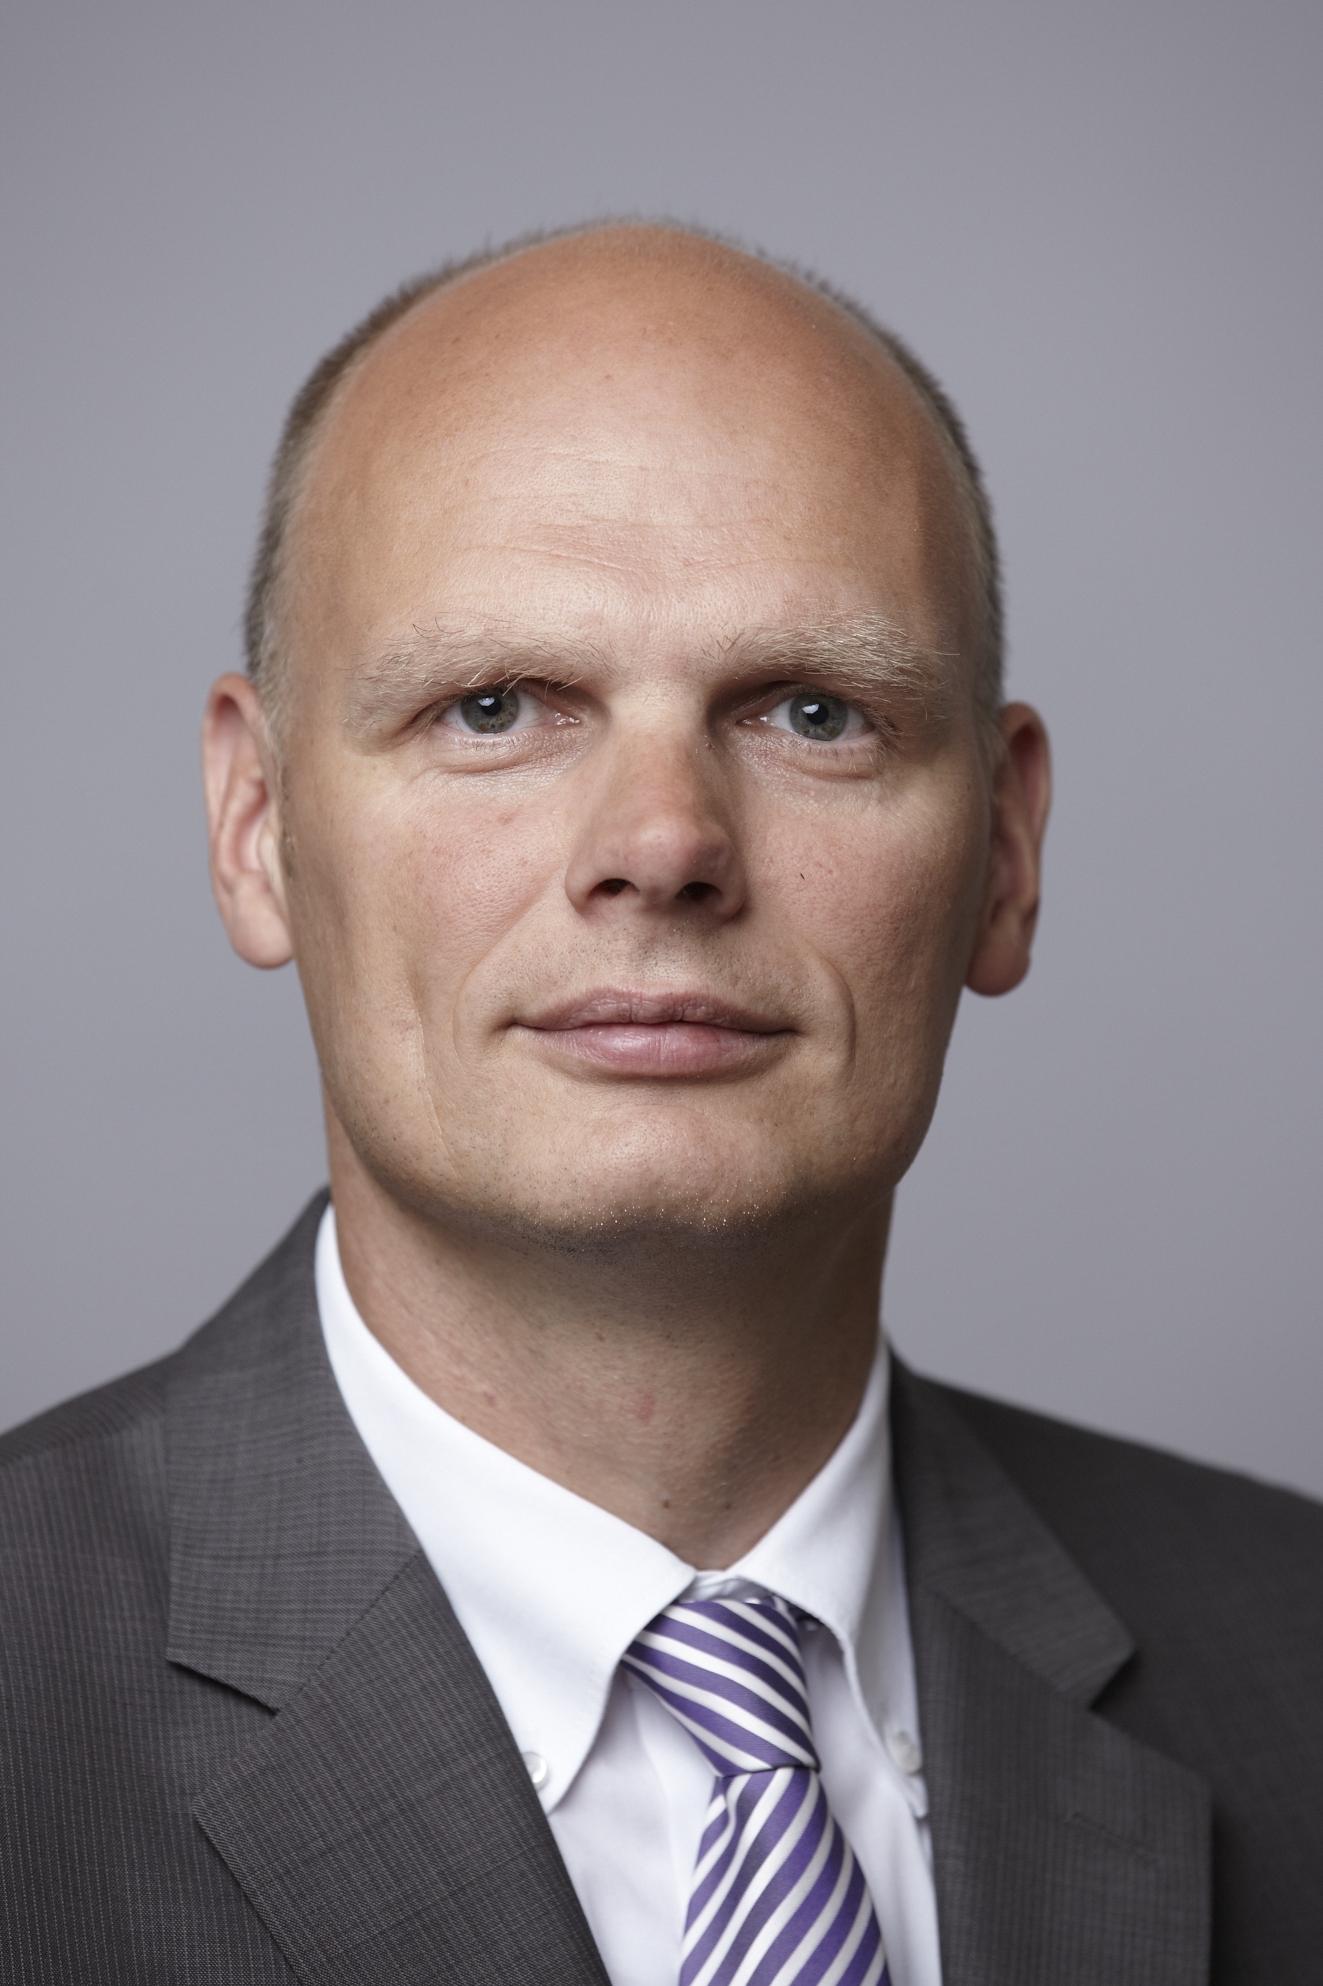 Bernd Eckl has worked for Mahle in various leading roles since 1993.